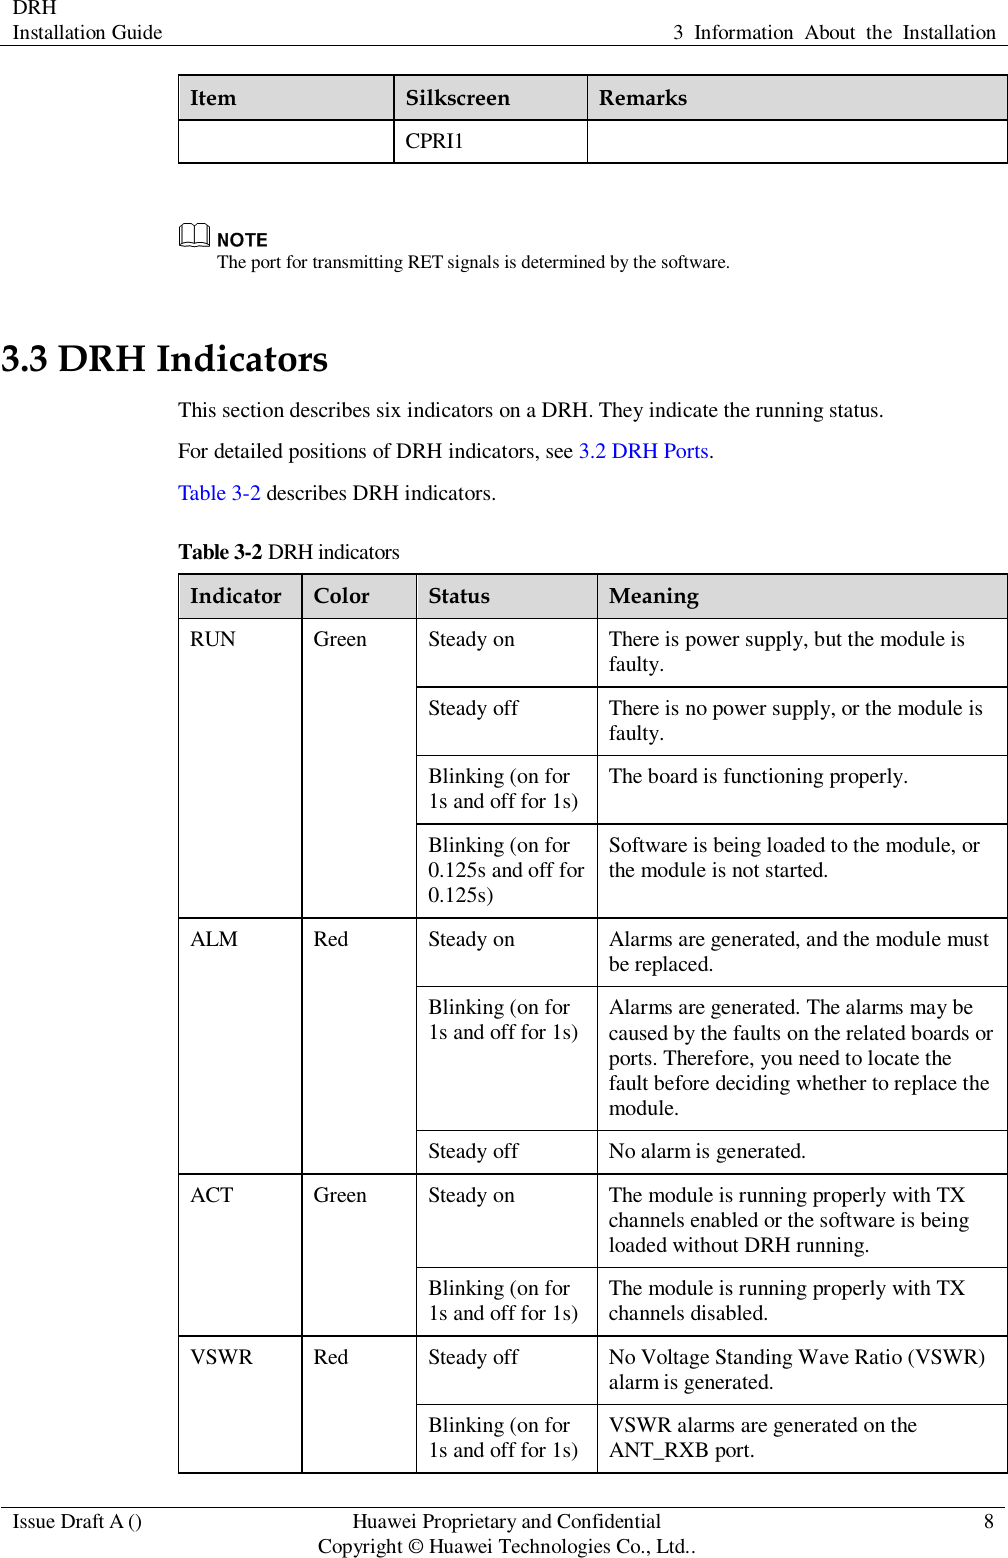 DRH   Installation Guide 3  Information  About  the  Installation  Issue Draft A () Huawei Proprietary and Confidential                                     Copyright © Huawei Technologies Co., Ltd.. 8  Item Silkscreen Remarks CPRI1   The port for transmitting RET signals is determined by the software. 3.3 DRH Indicators This section describes six indicators on a DRH. They indicate the running status.   For detailed positions of DRH indicators, see 3.2 DRH Ports. Table 3-2 describes DRH indicators. Table 3-2 DRH indicators Indicator Color Status Meaning RUN Green Steady on There is power supply, but the module is faulty. Steady off There is no power supply, or the module is faulty. Blinking (on for 1s and off for 1s) The board is functioning properly. Blinking (on for 0.125s and off for 0.125s) Software is being loaded to the module, or the module is not started. ALM Red Steady on Alarms are generated, and the module must be replaced. Blinking (on for 1s and off for 1s) Alarms are generated. The alarms may be caused by the faults on the related boards or ports. Therefore, you need to locate the fault before deciding whether to replace the module. Steady off No alarm is generated. ACT Green Steady on The module is running properly with TX channels enabled or the software is being loaded without DRH running. Blinking (on for 1s and off for 1s) The module is running properly with TX channels disabled. VSWR Red Steady off No Voltage Standing Wave Ratio (VSWR) alarm is generated. Blinking (on for 1s and off for 1s) VSWR alarms are generated on the ANT_RXB port. 